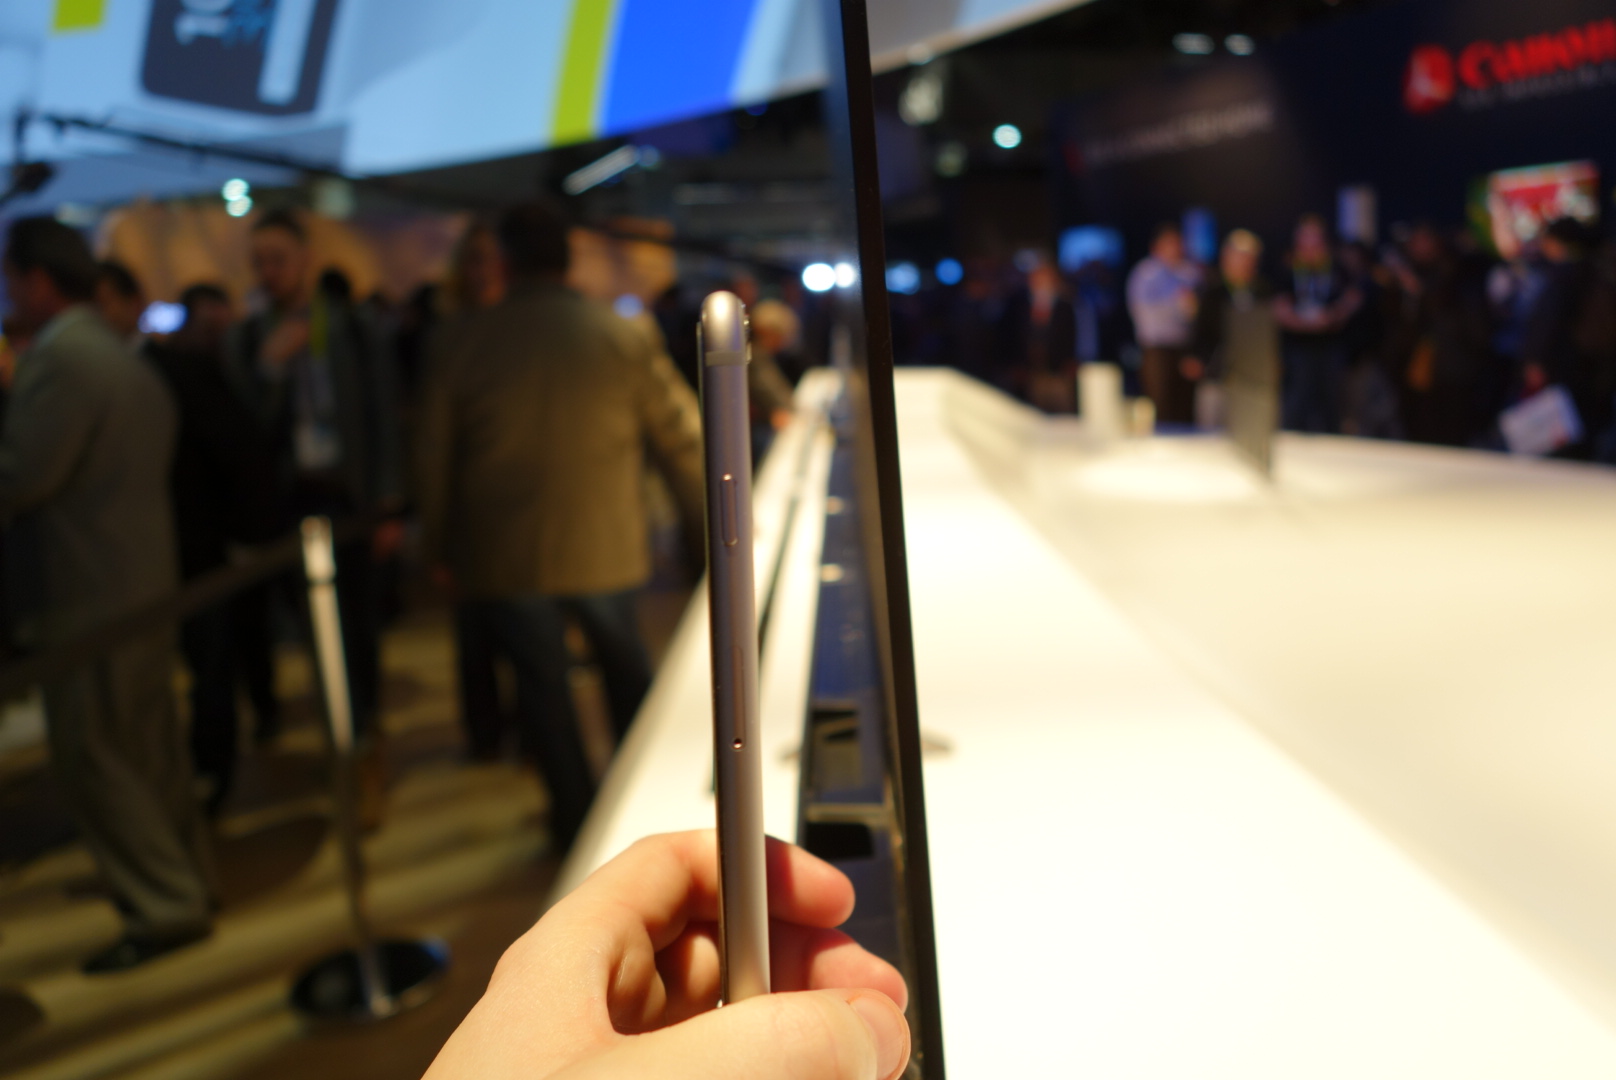 Just How Thin Is Sony’s New Crazy-Skinny TV?